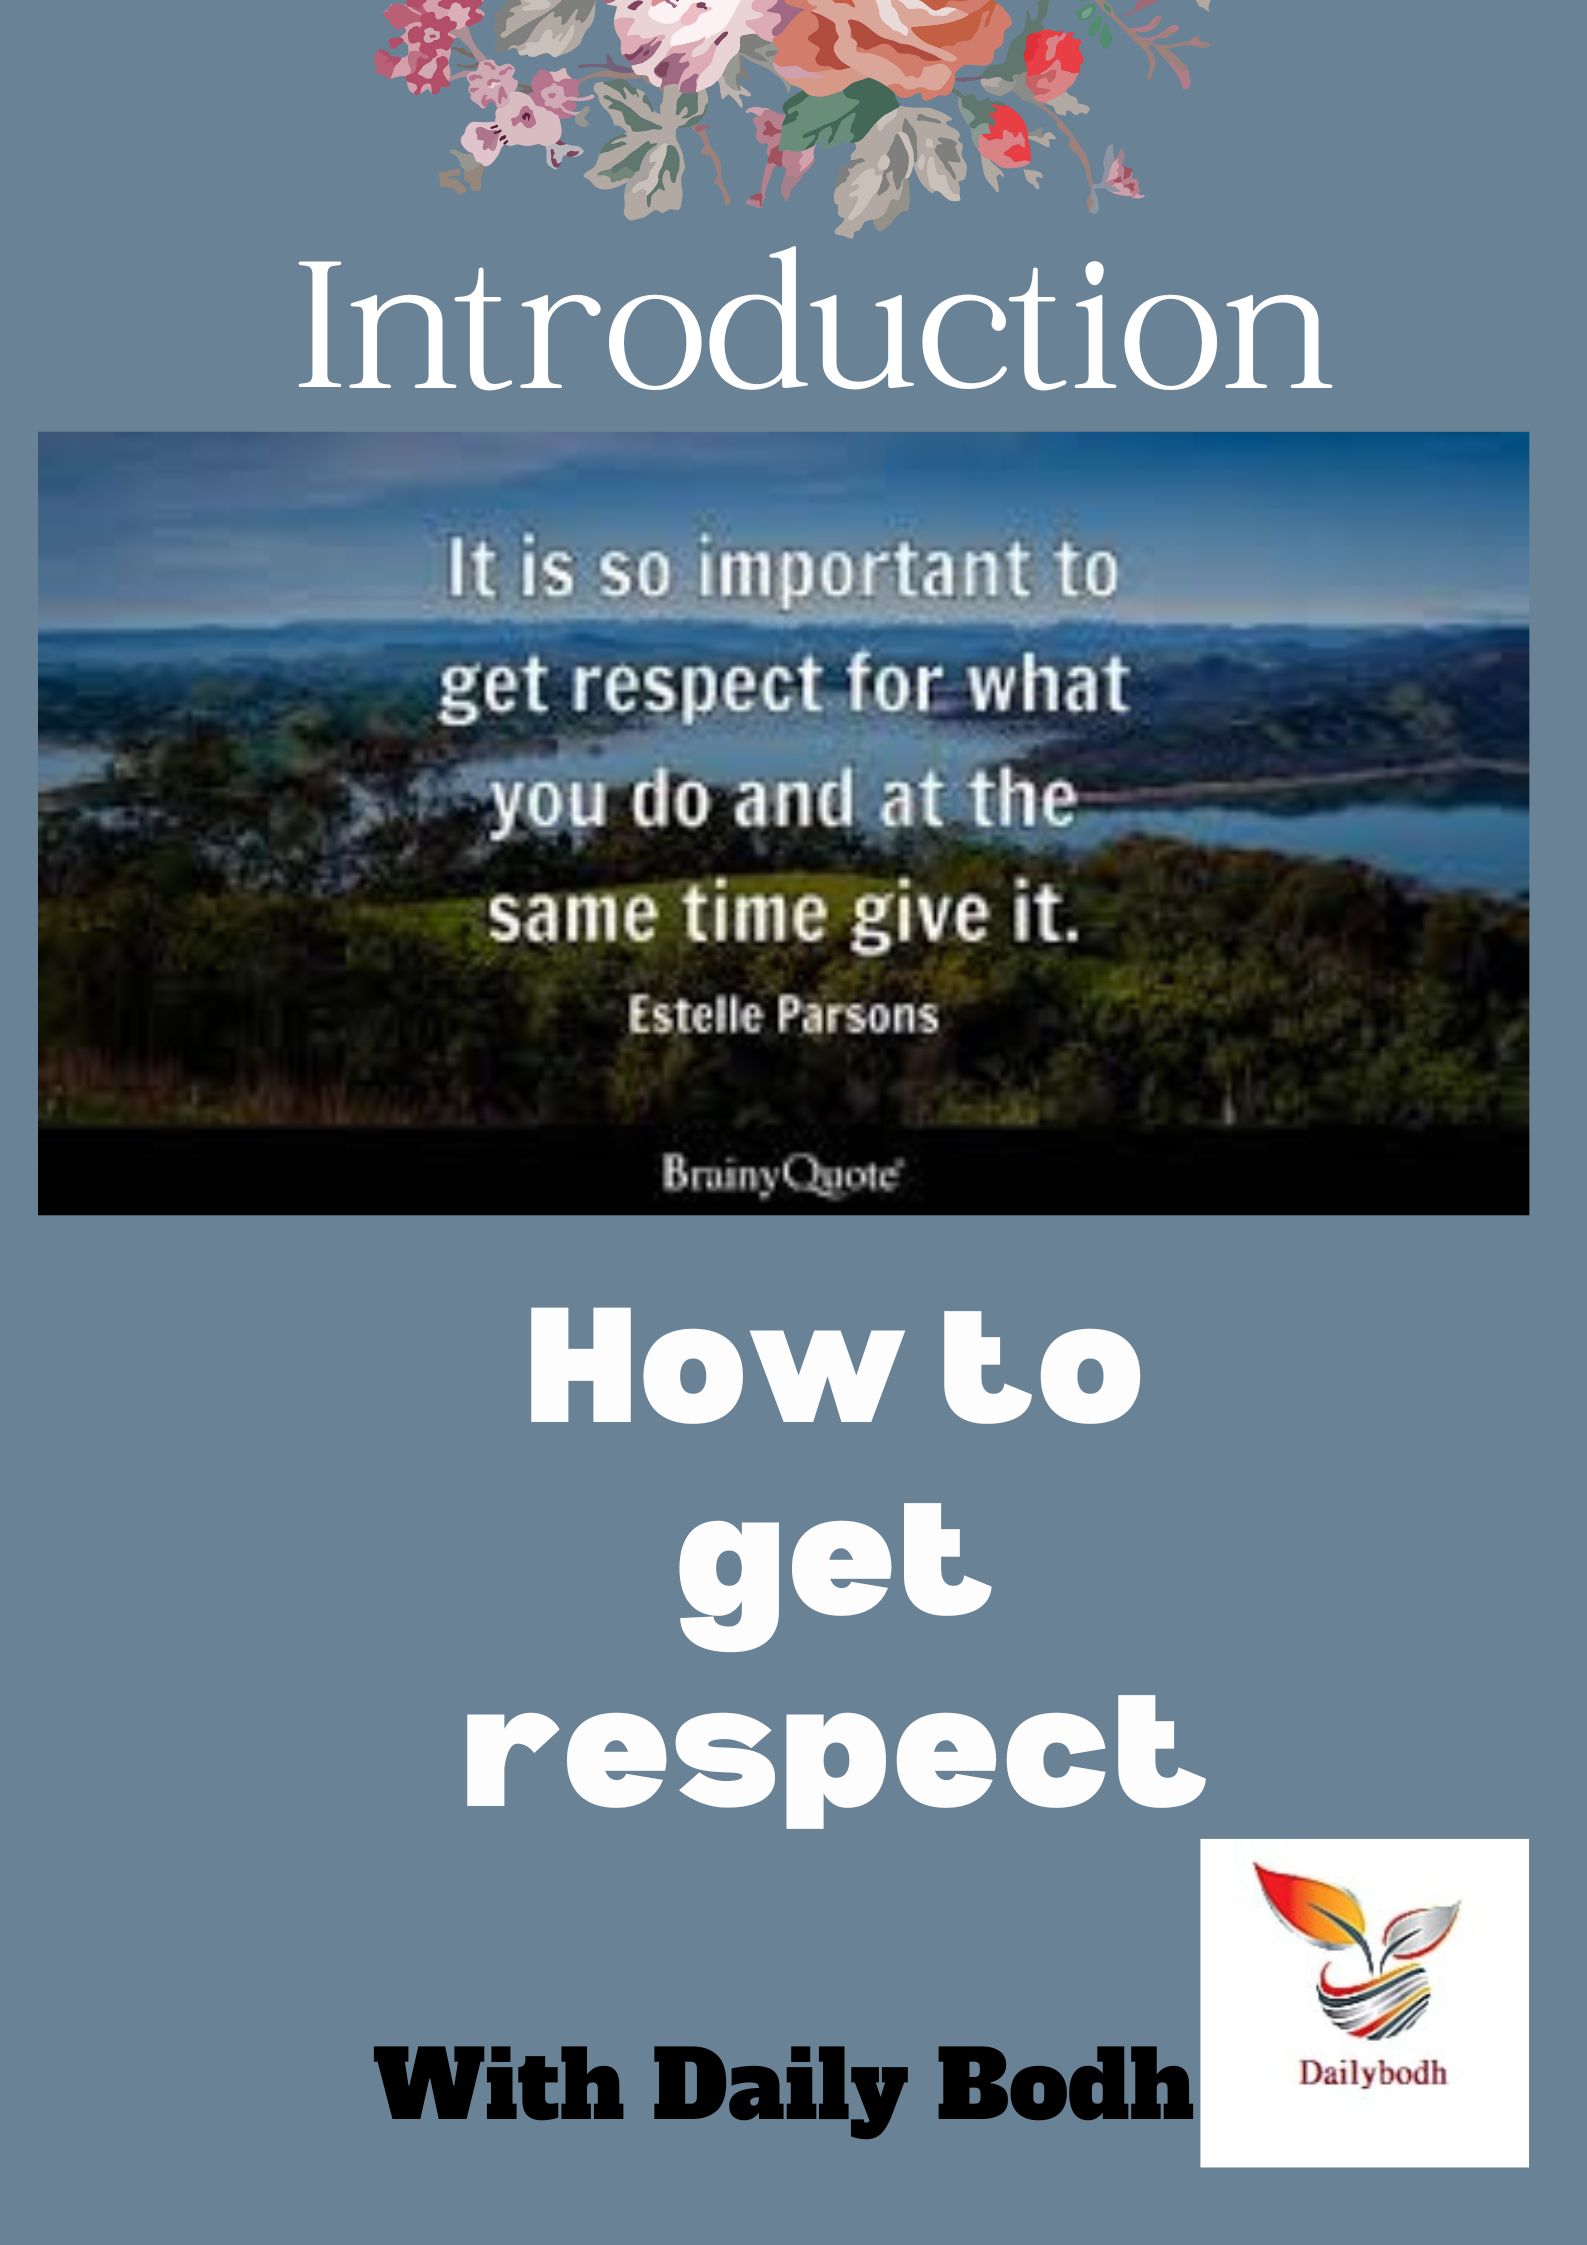 Introduction (How to get respect)